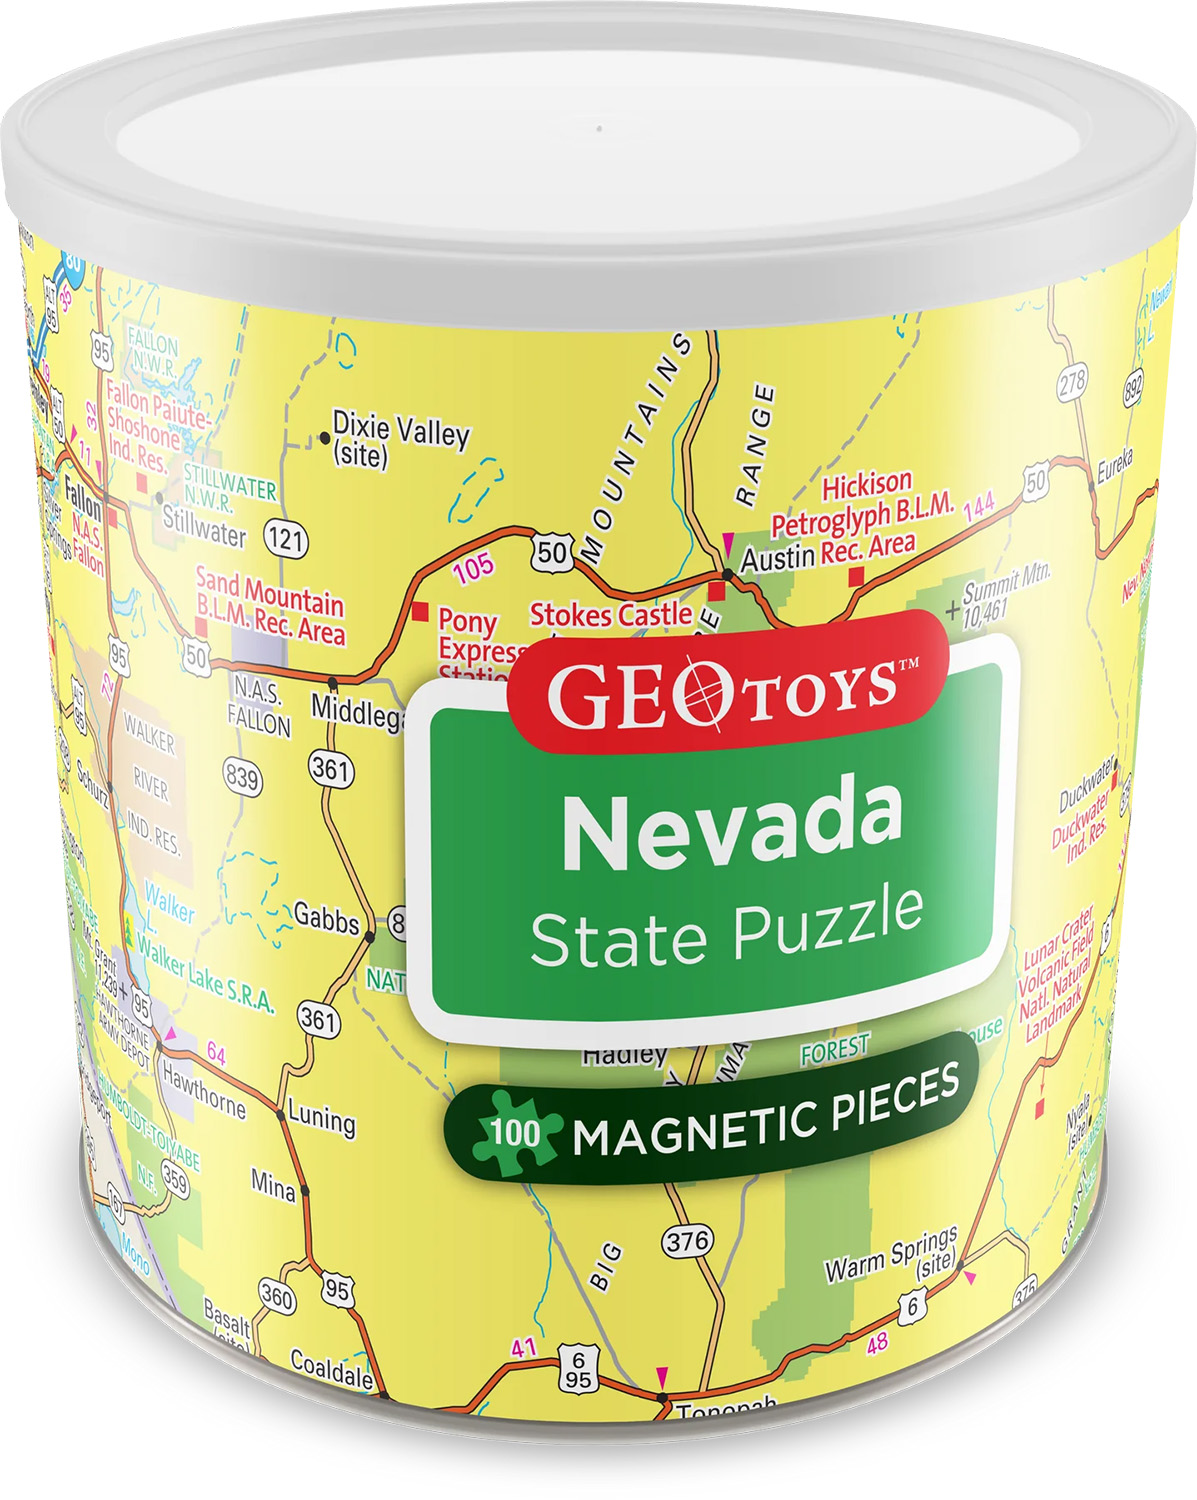 Denver - Magnetic Puzzle  Maps & Geography Magnetic Puzzle By Geo Toys